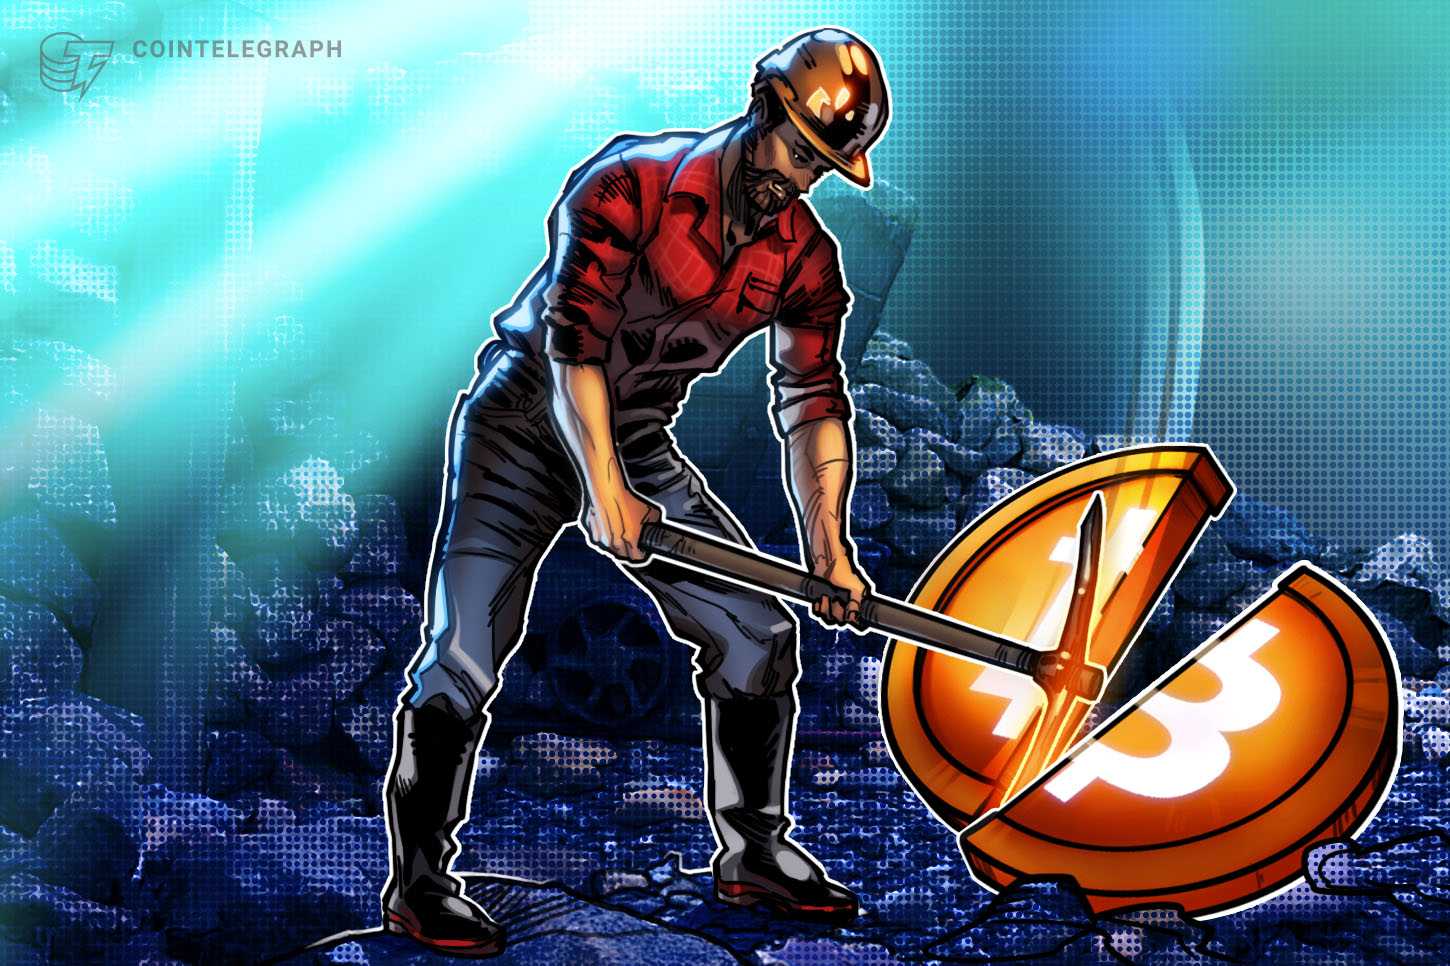 Bitcoin miner income surges to pre-halving ranges